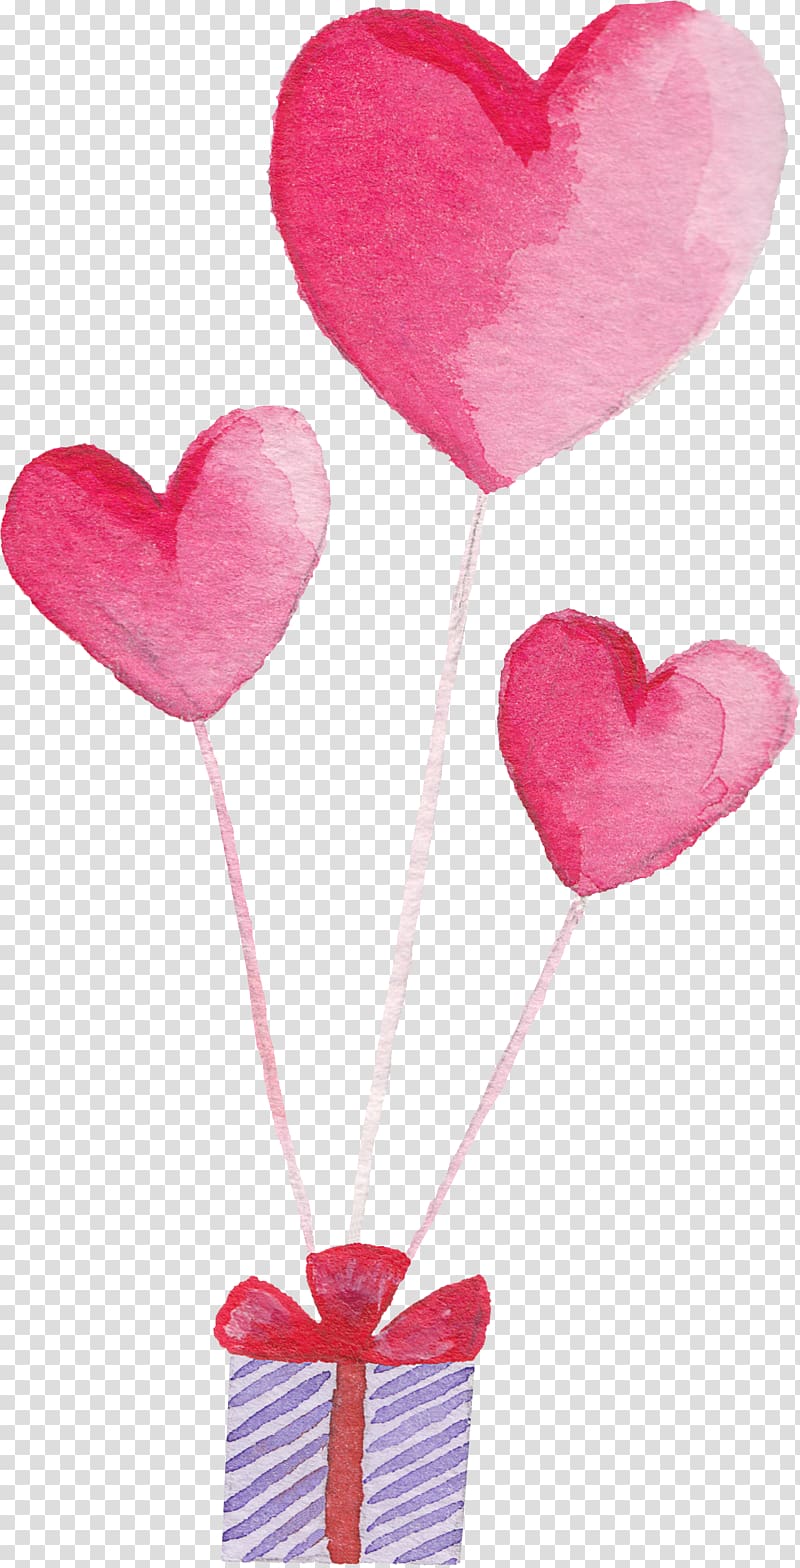 pink hearts illustration, Balloon Heart Cartoon Watercolor painting Pink, Peach heart and gift box transparent background PNG clipart